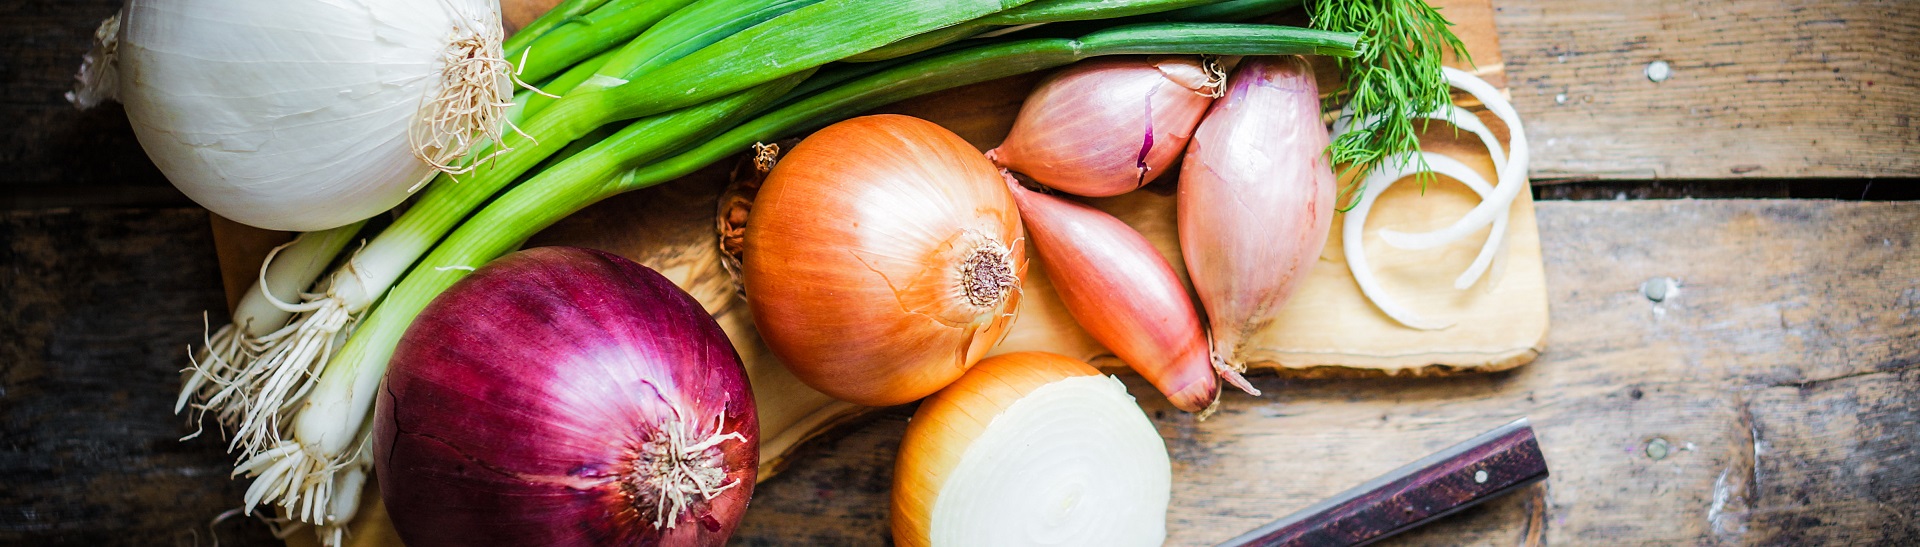 onions and other alliums are top superfoods